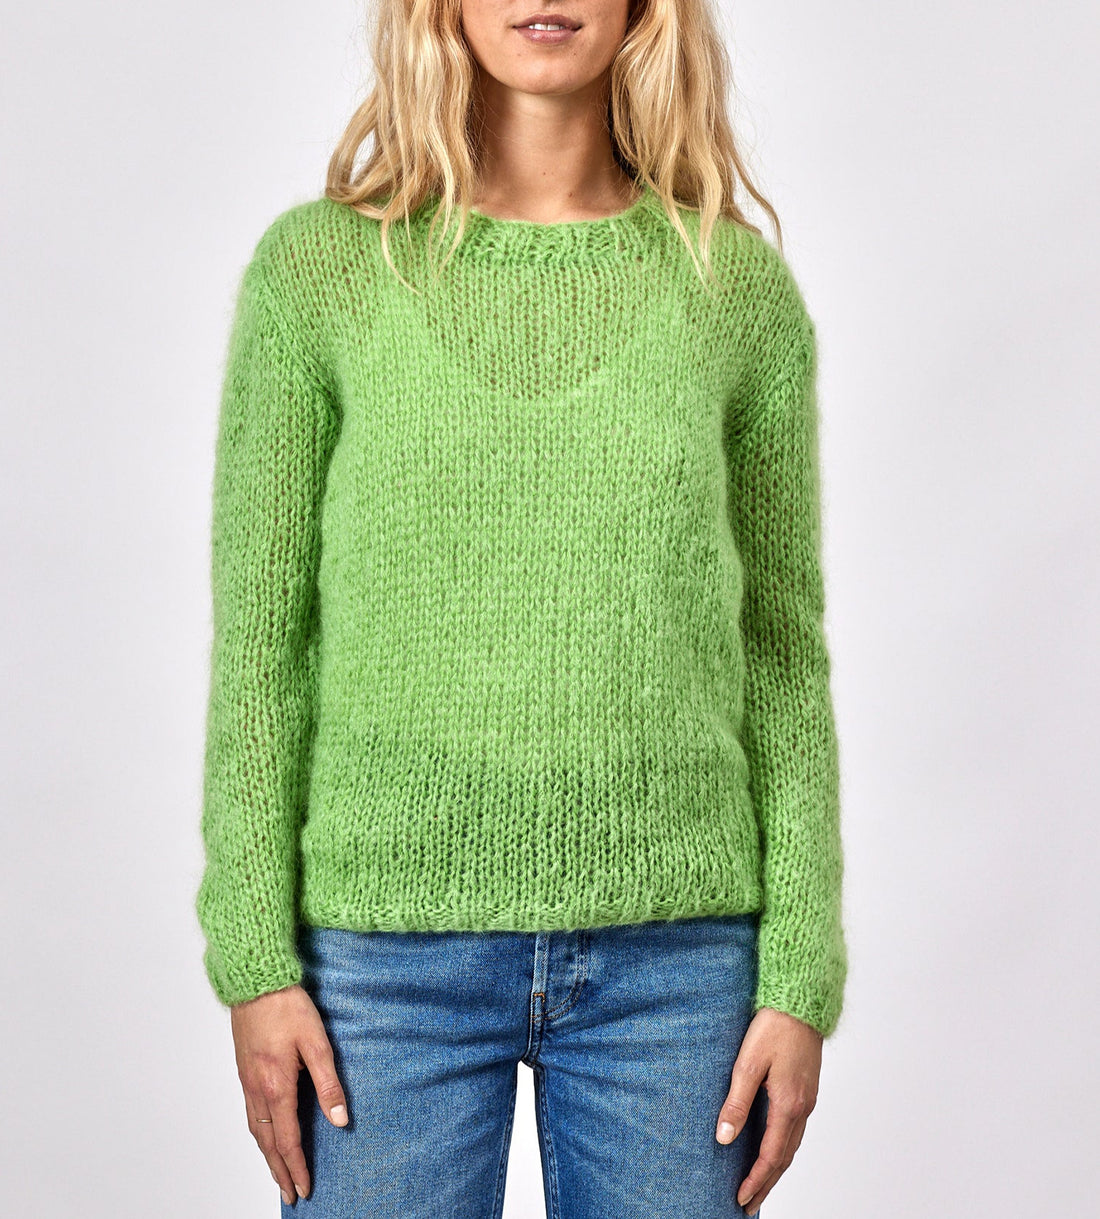 Elin knit lime green